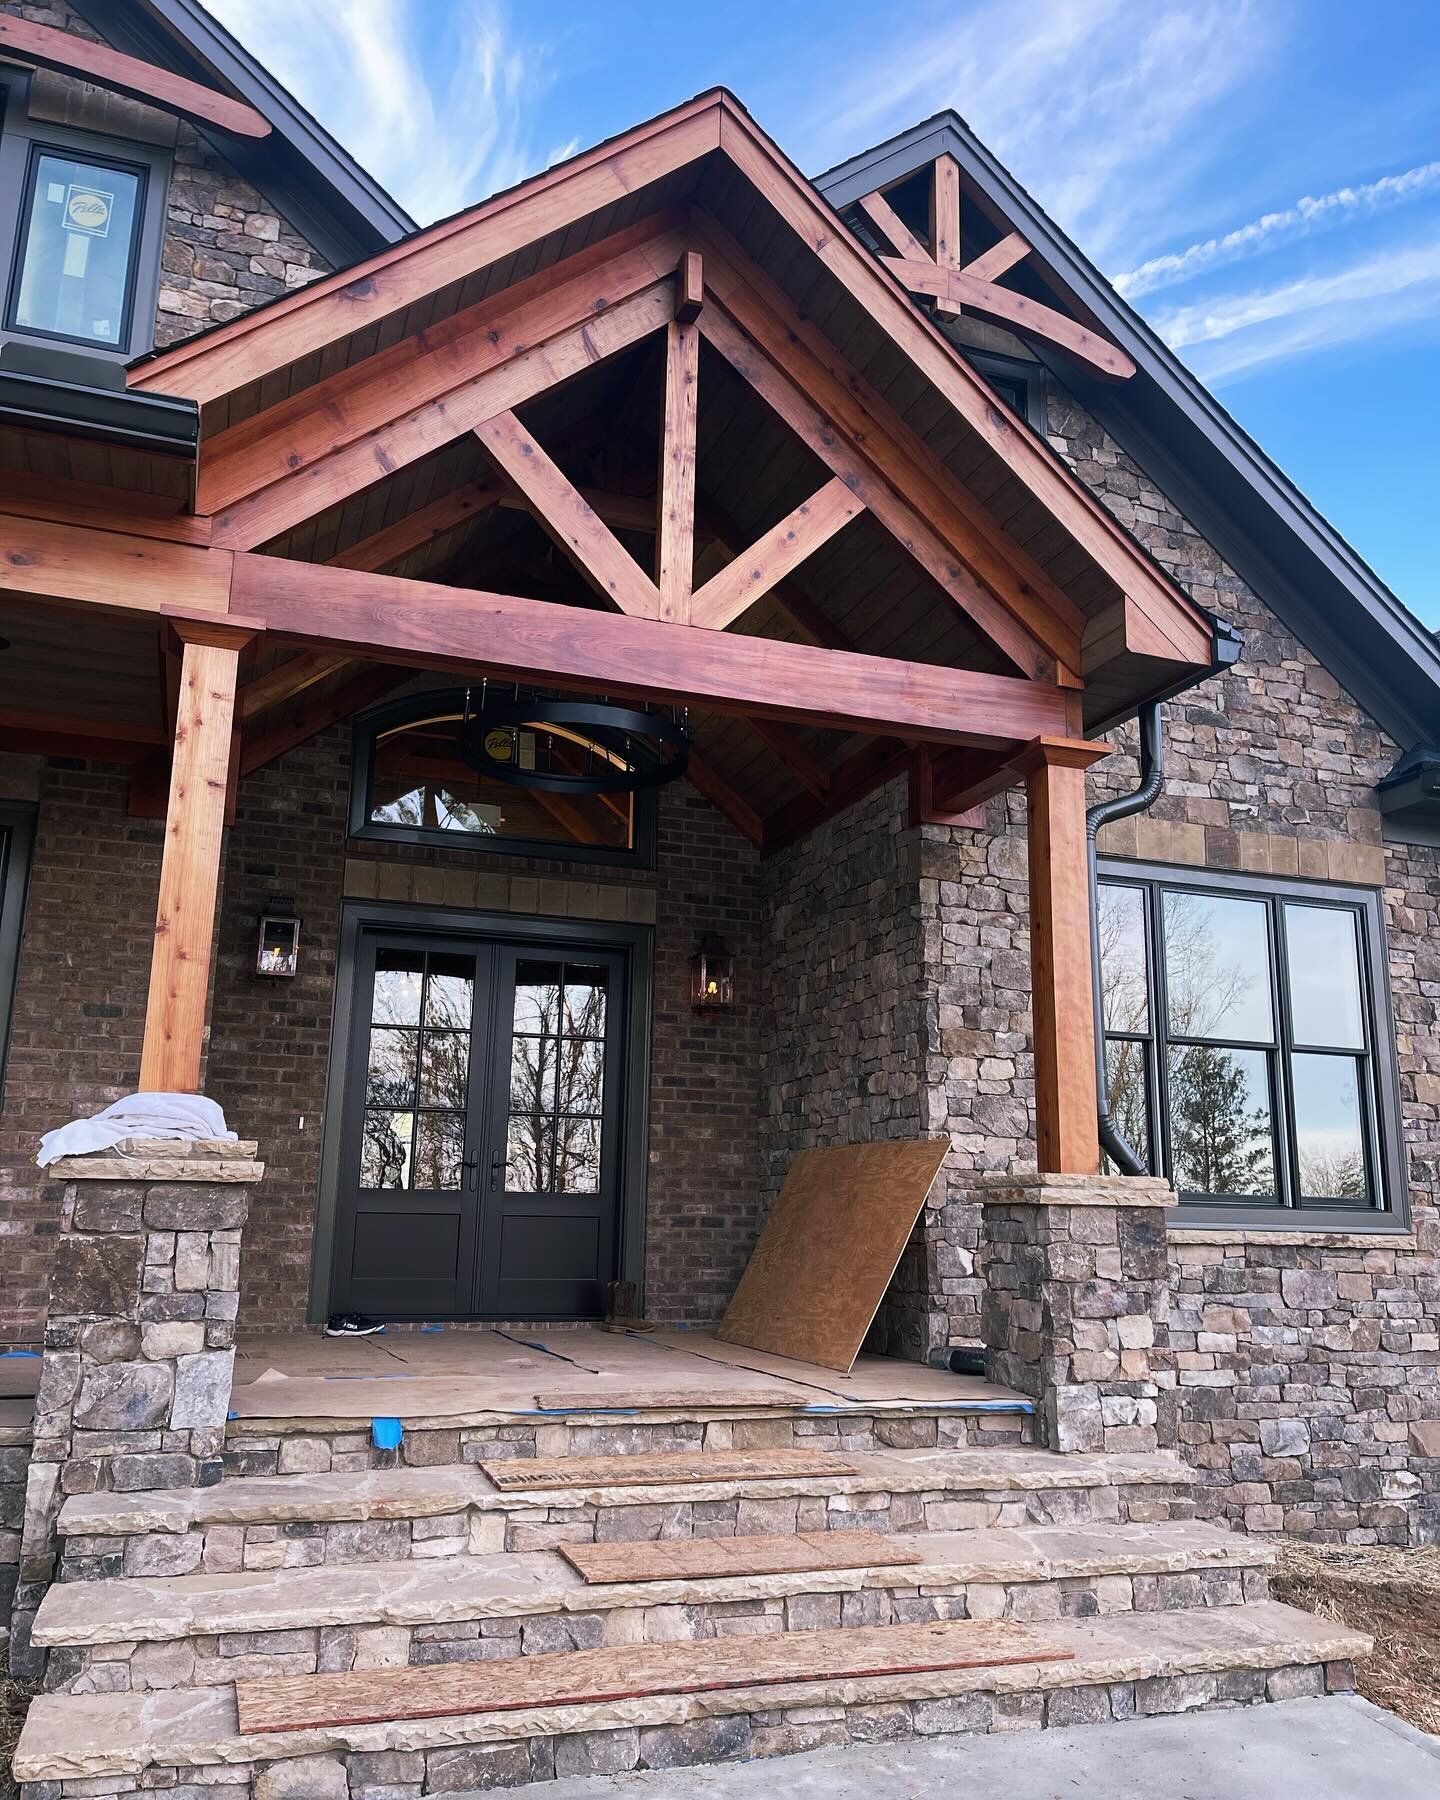 Check out this newly constructed mountain home! From the rugged look of Redwood beams to the rustic charm of tongue-and-groove ceilings, our premium building supplies can bring your dream home to life.

Come on in or give us a call at 770-779-8988 to